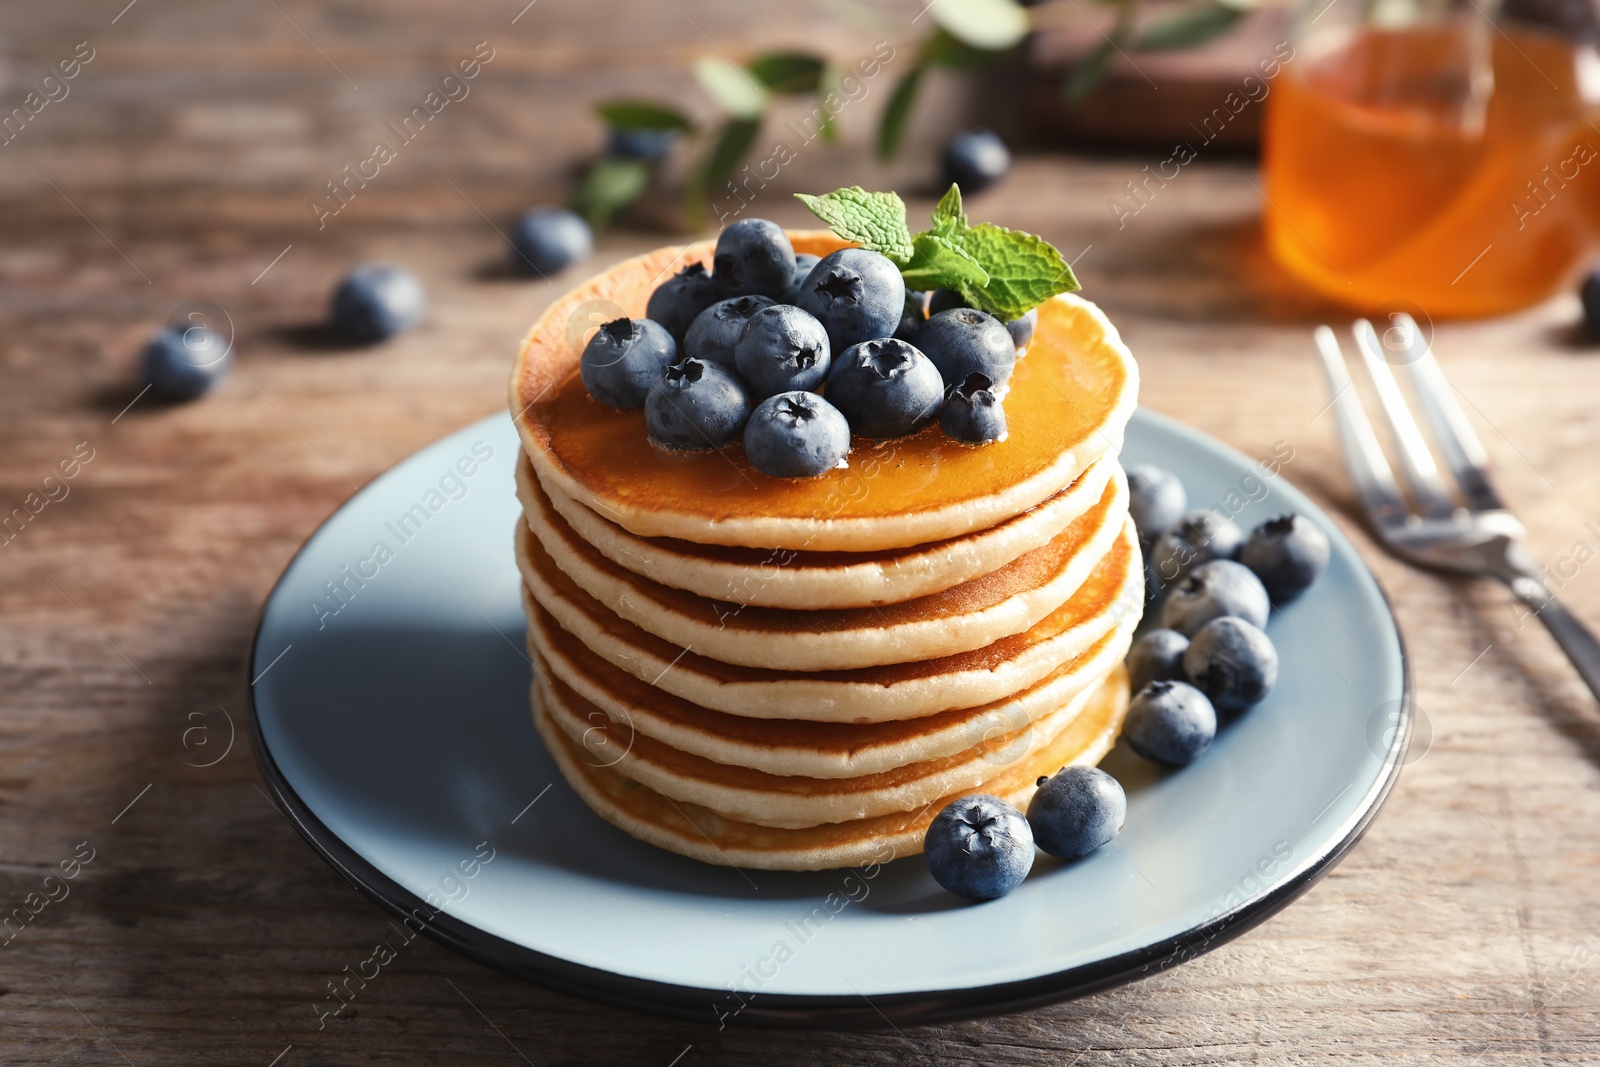 Photo of Plate with pancakes and berries on wooden table